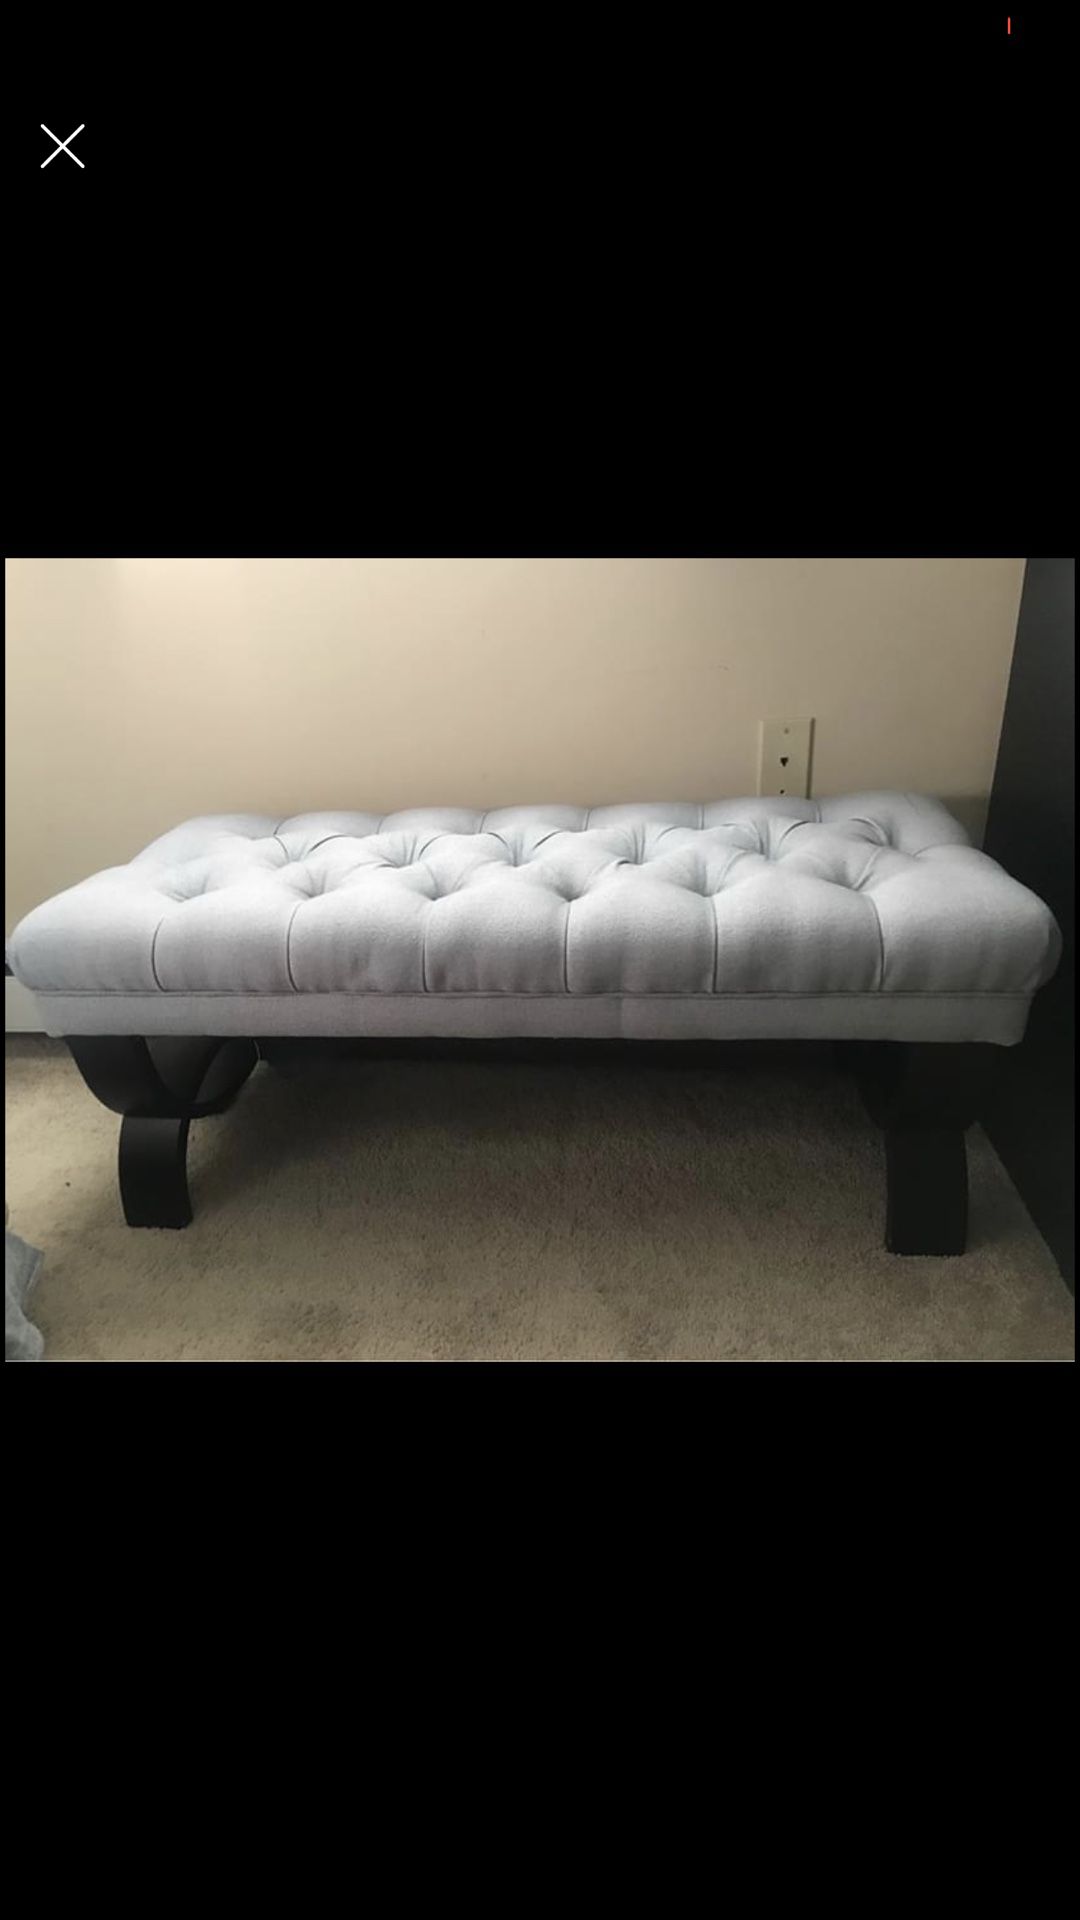 Ottoman for end of the bed